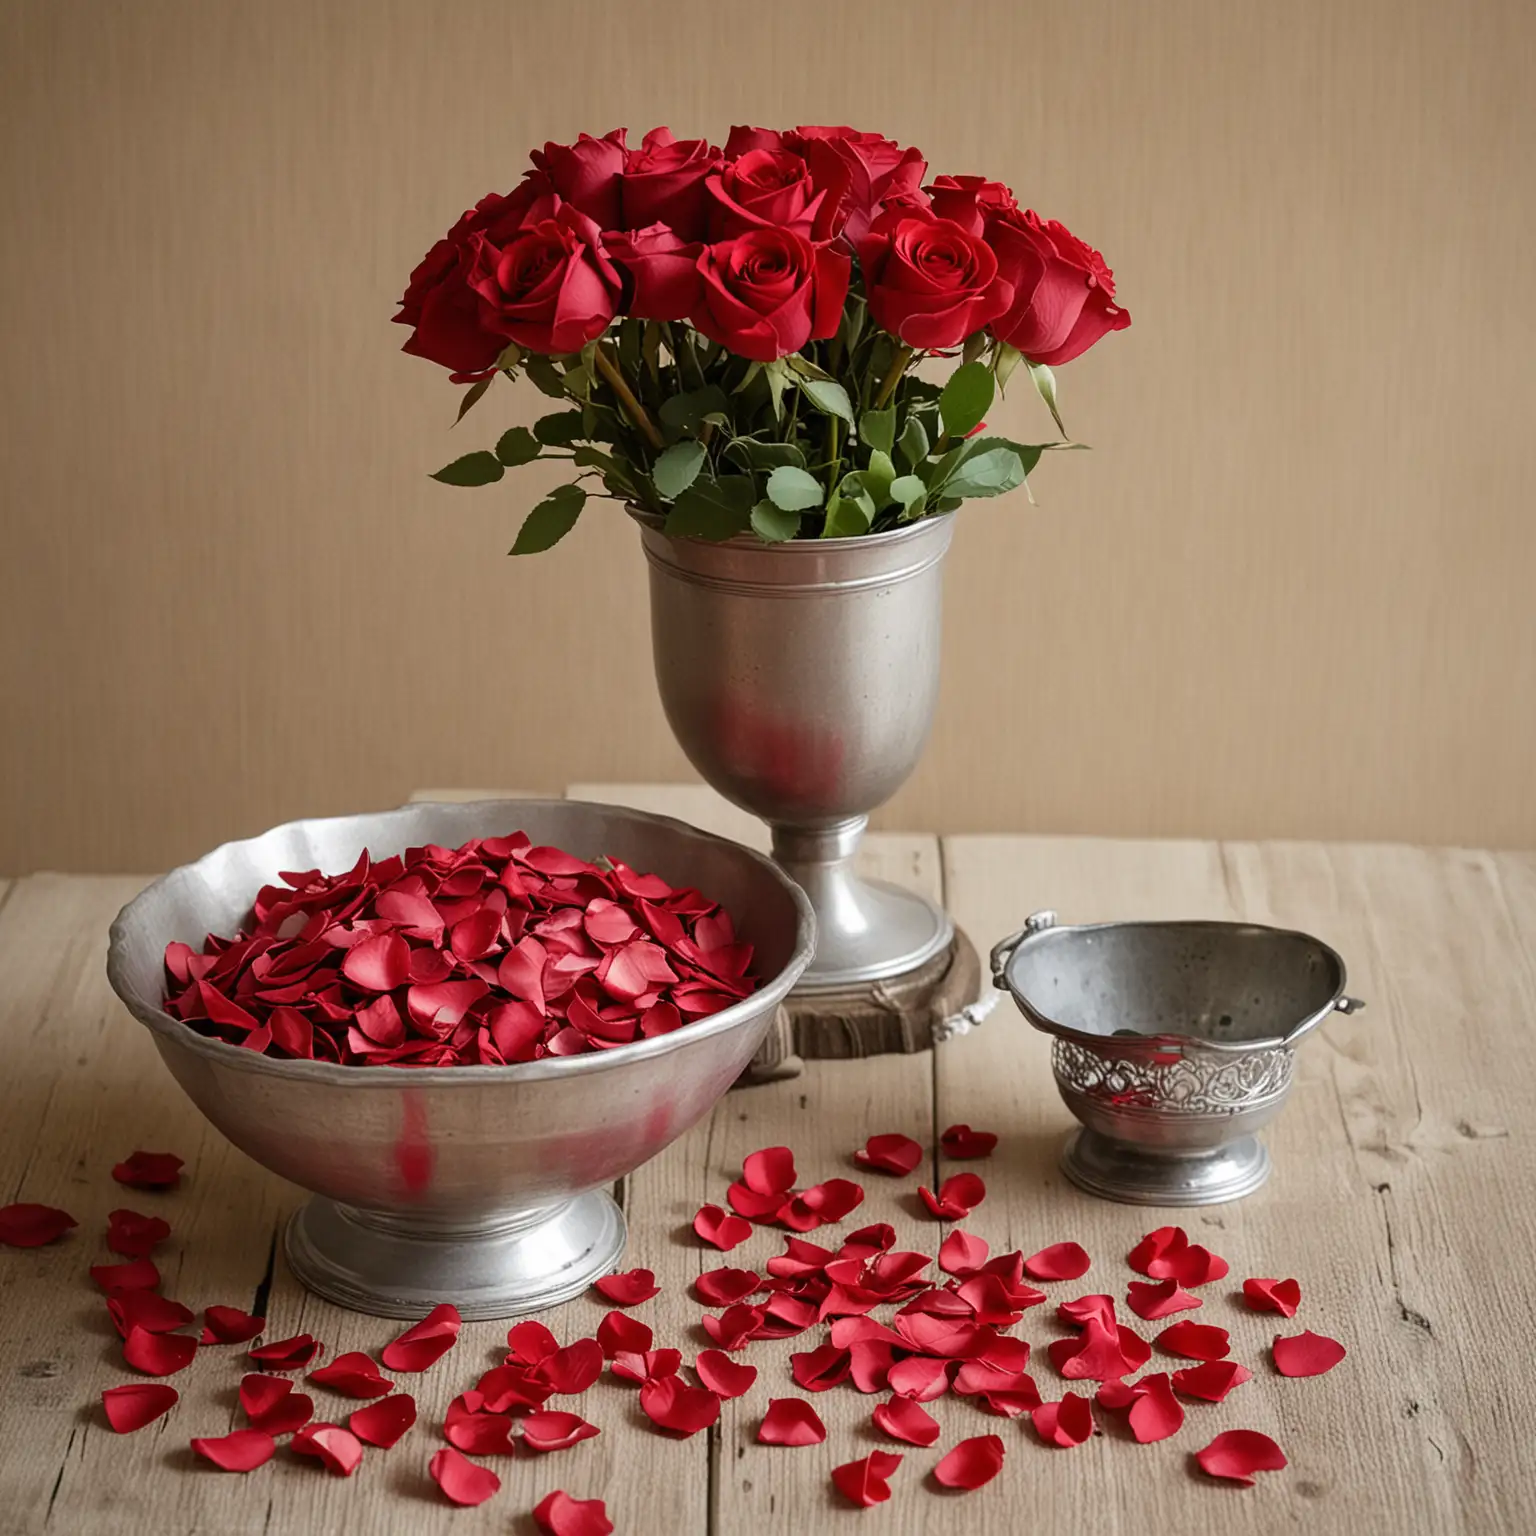 a small and simple DIY vintage wedding centerpieces with red rose petals and an antique mixing bowl